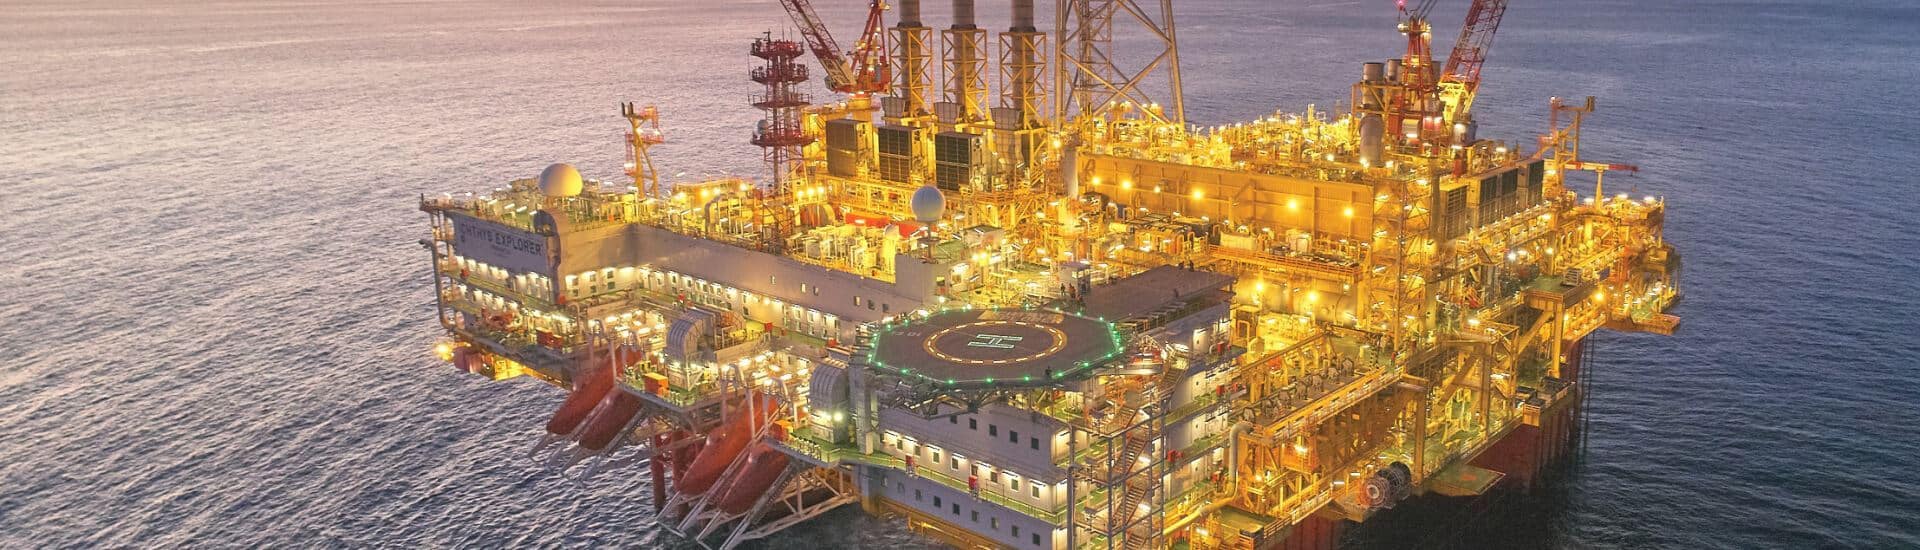 Ichthys Explorer LNG offshore central processing facility; Source: Inpex